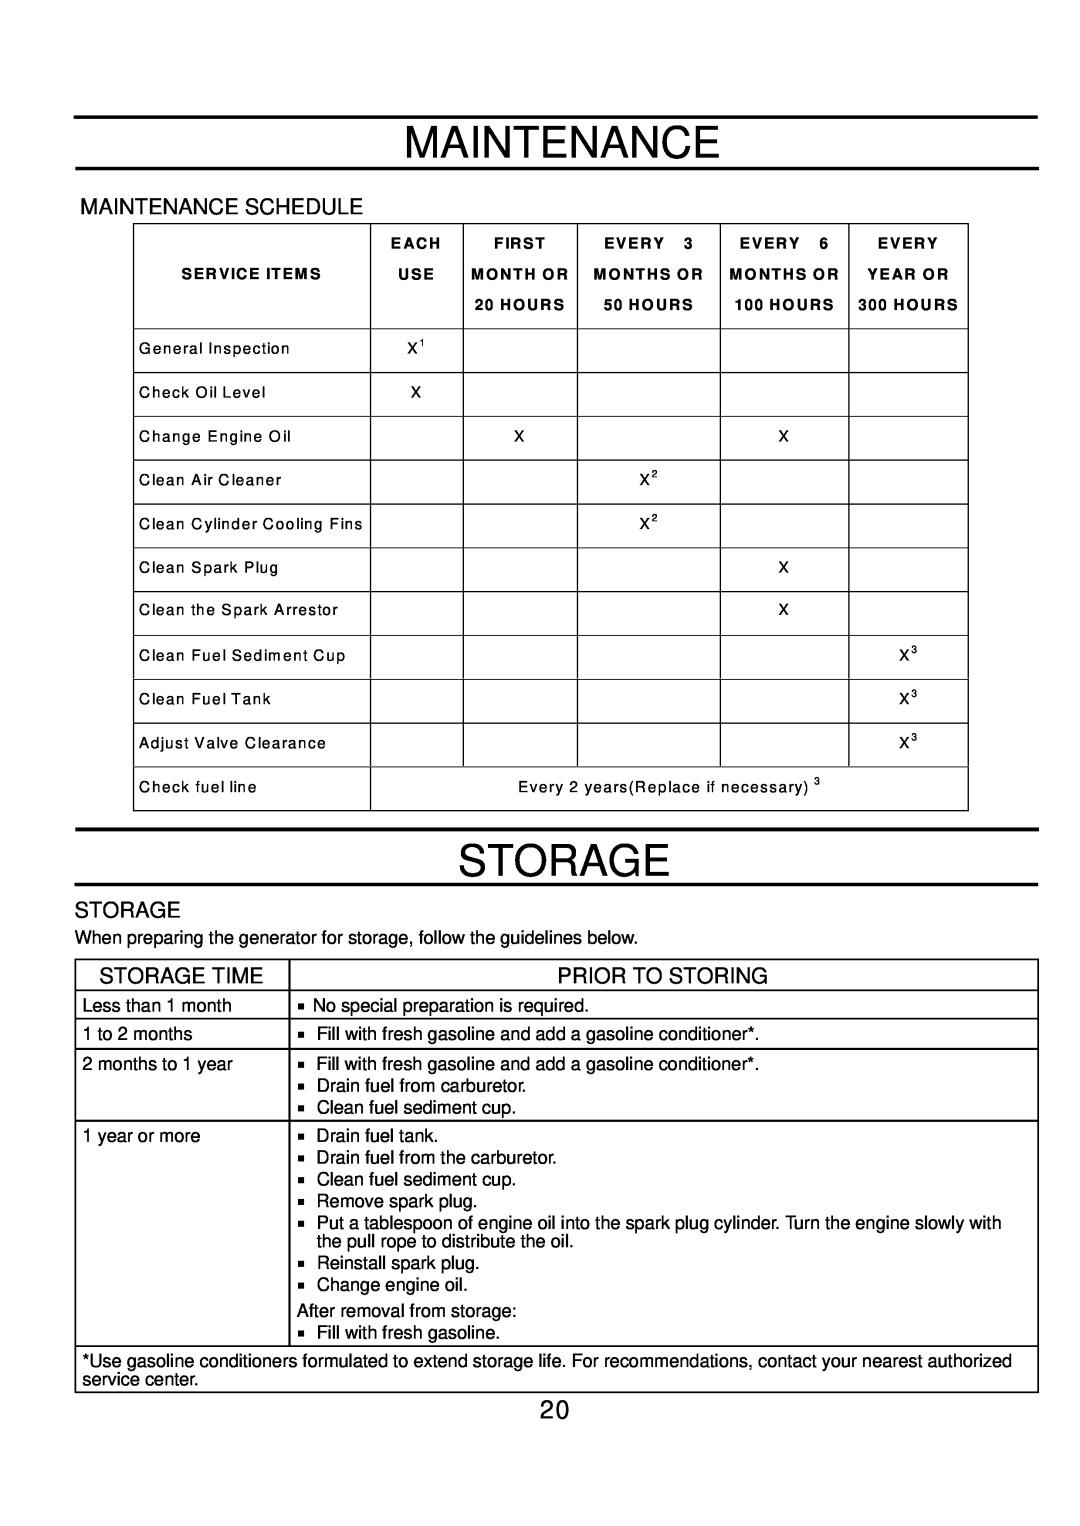 Poulan PP7600E, PP4300, PP6600E manual Maintenance Schedule, Storage Time, Prior To Storing 